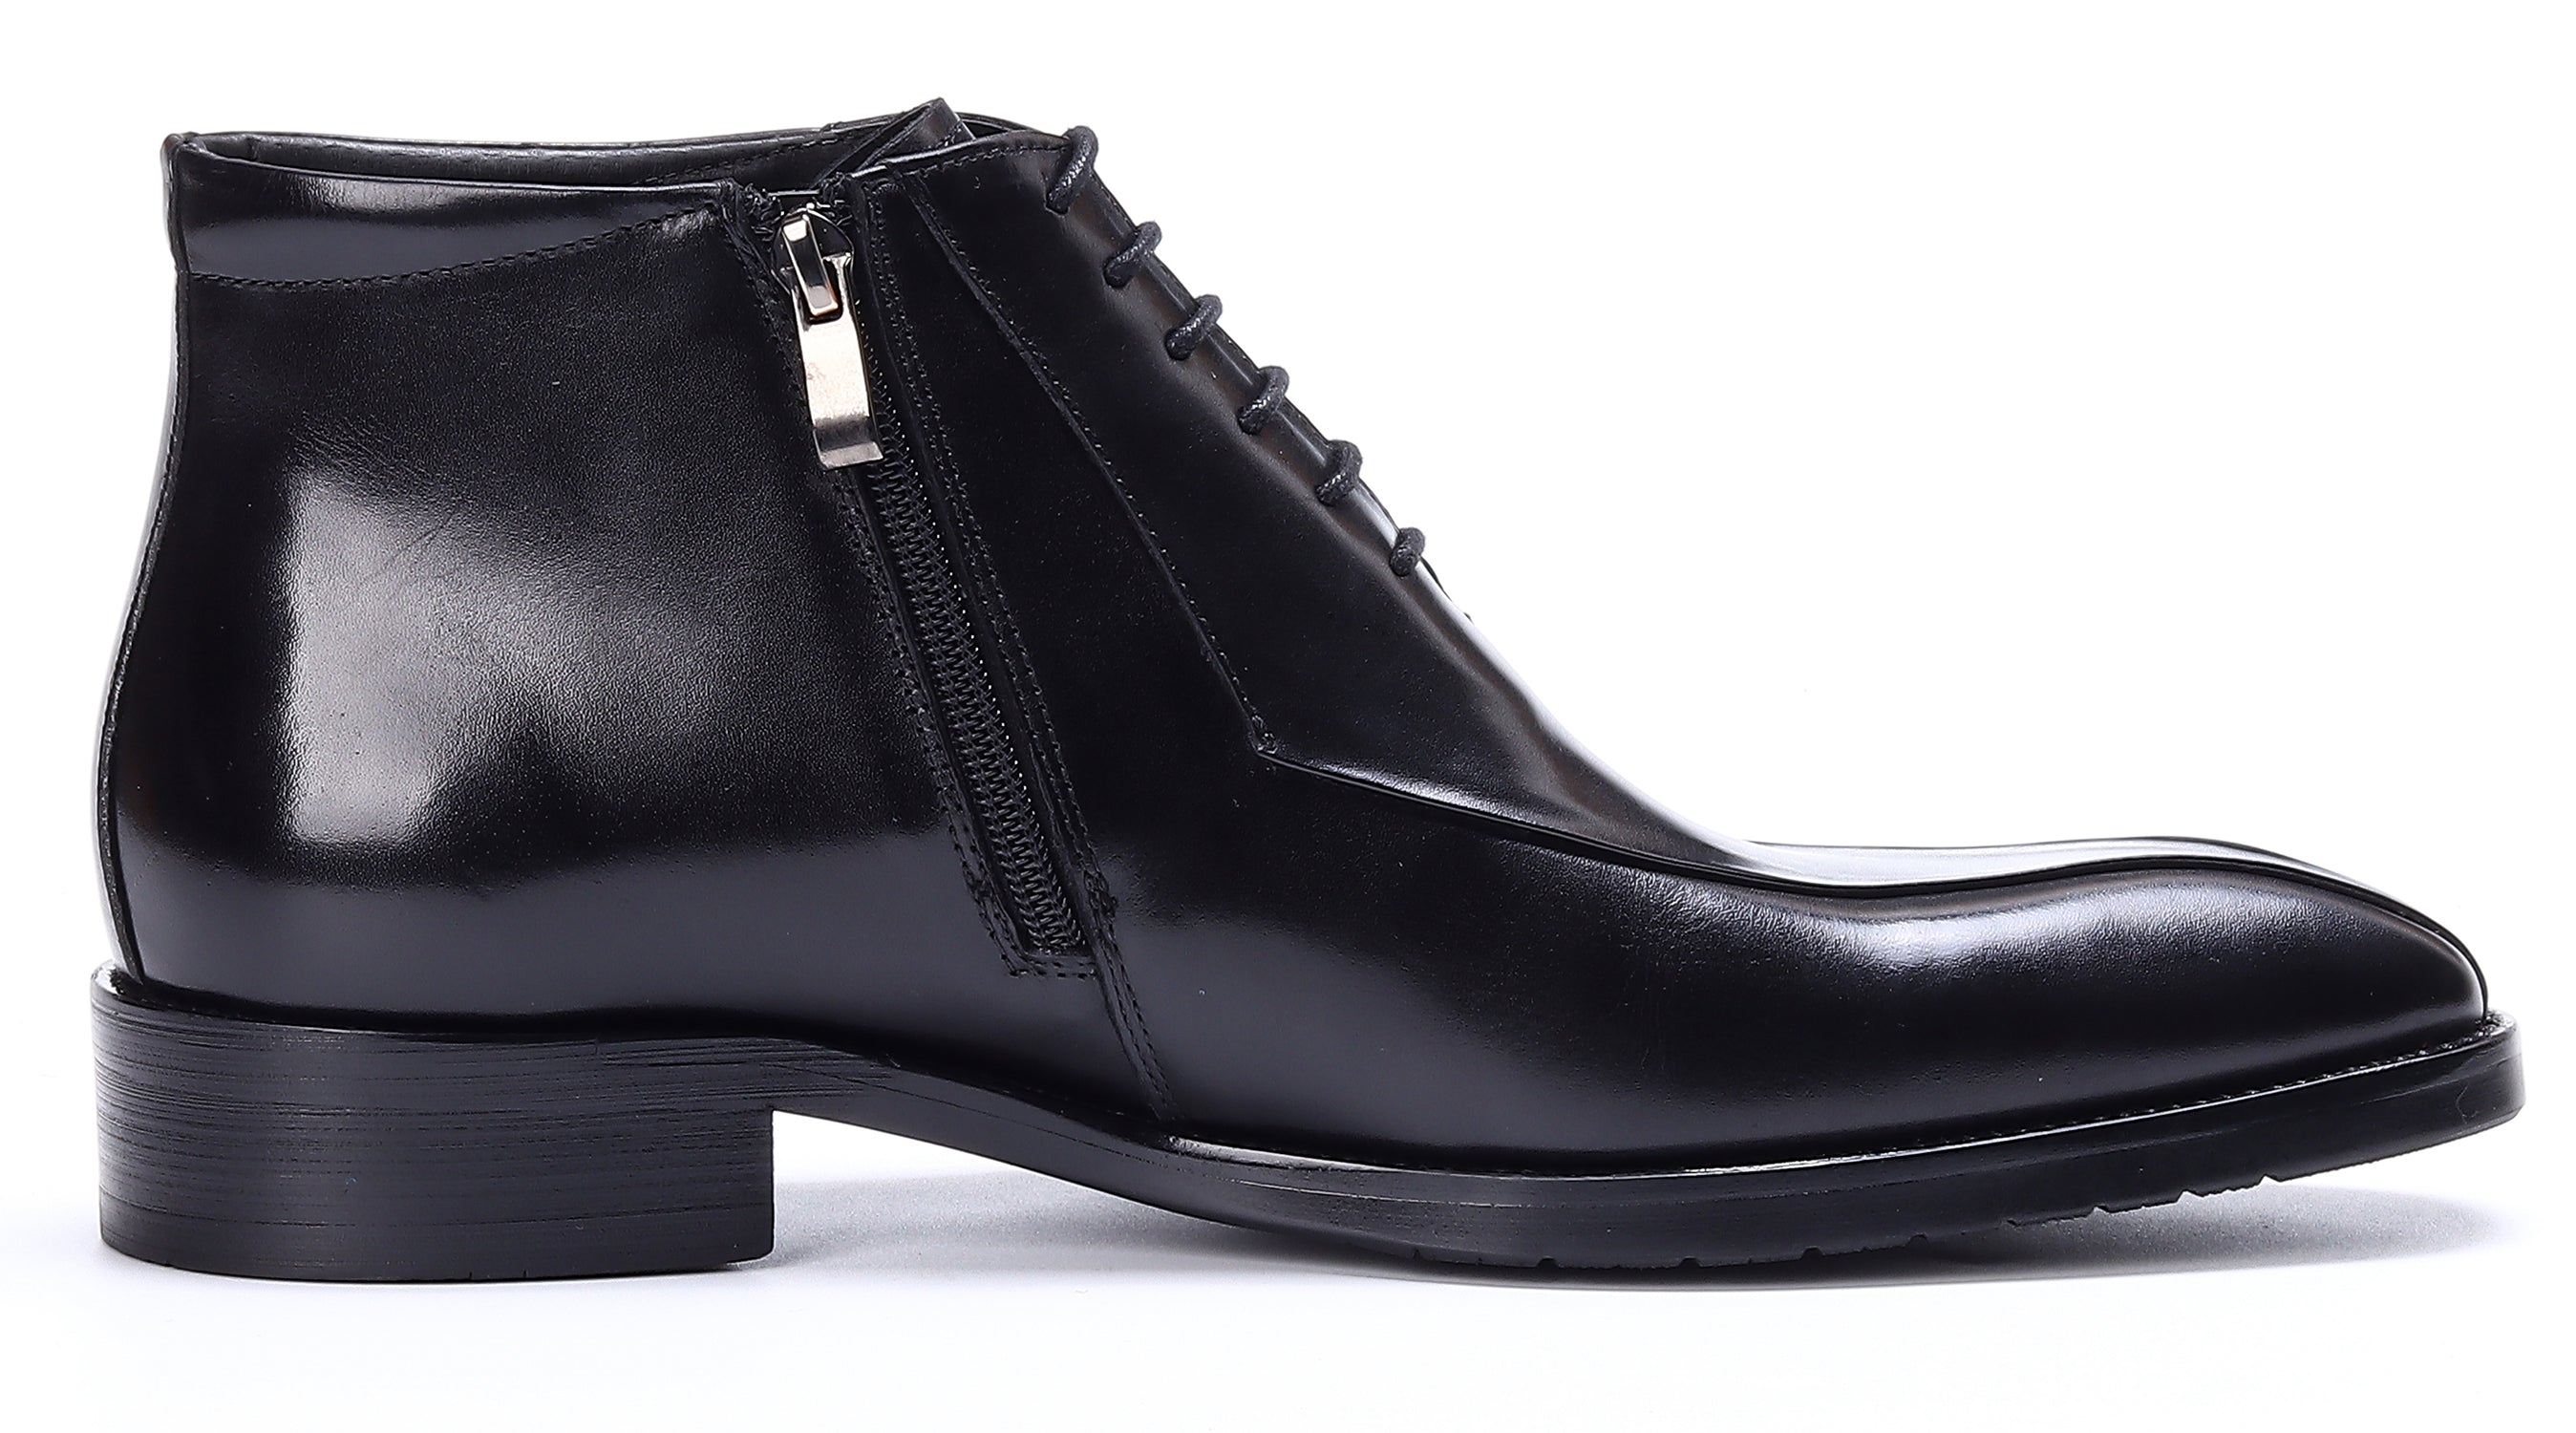 Men's Leather Fashion Formal Dress Boots